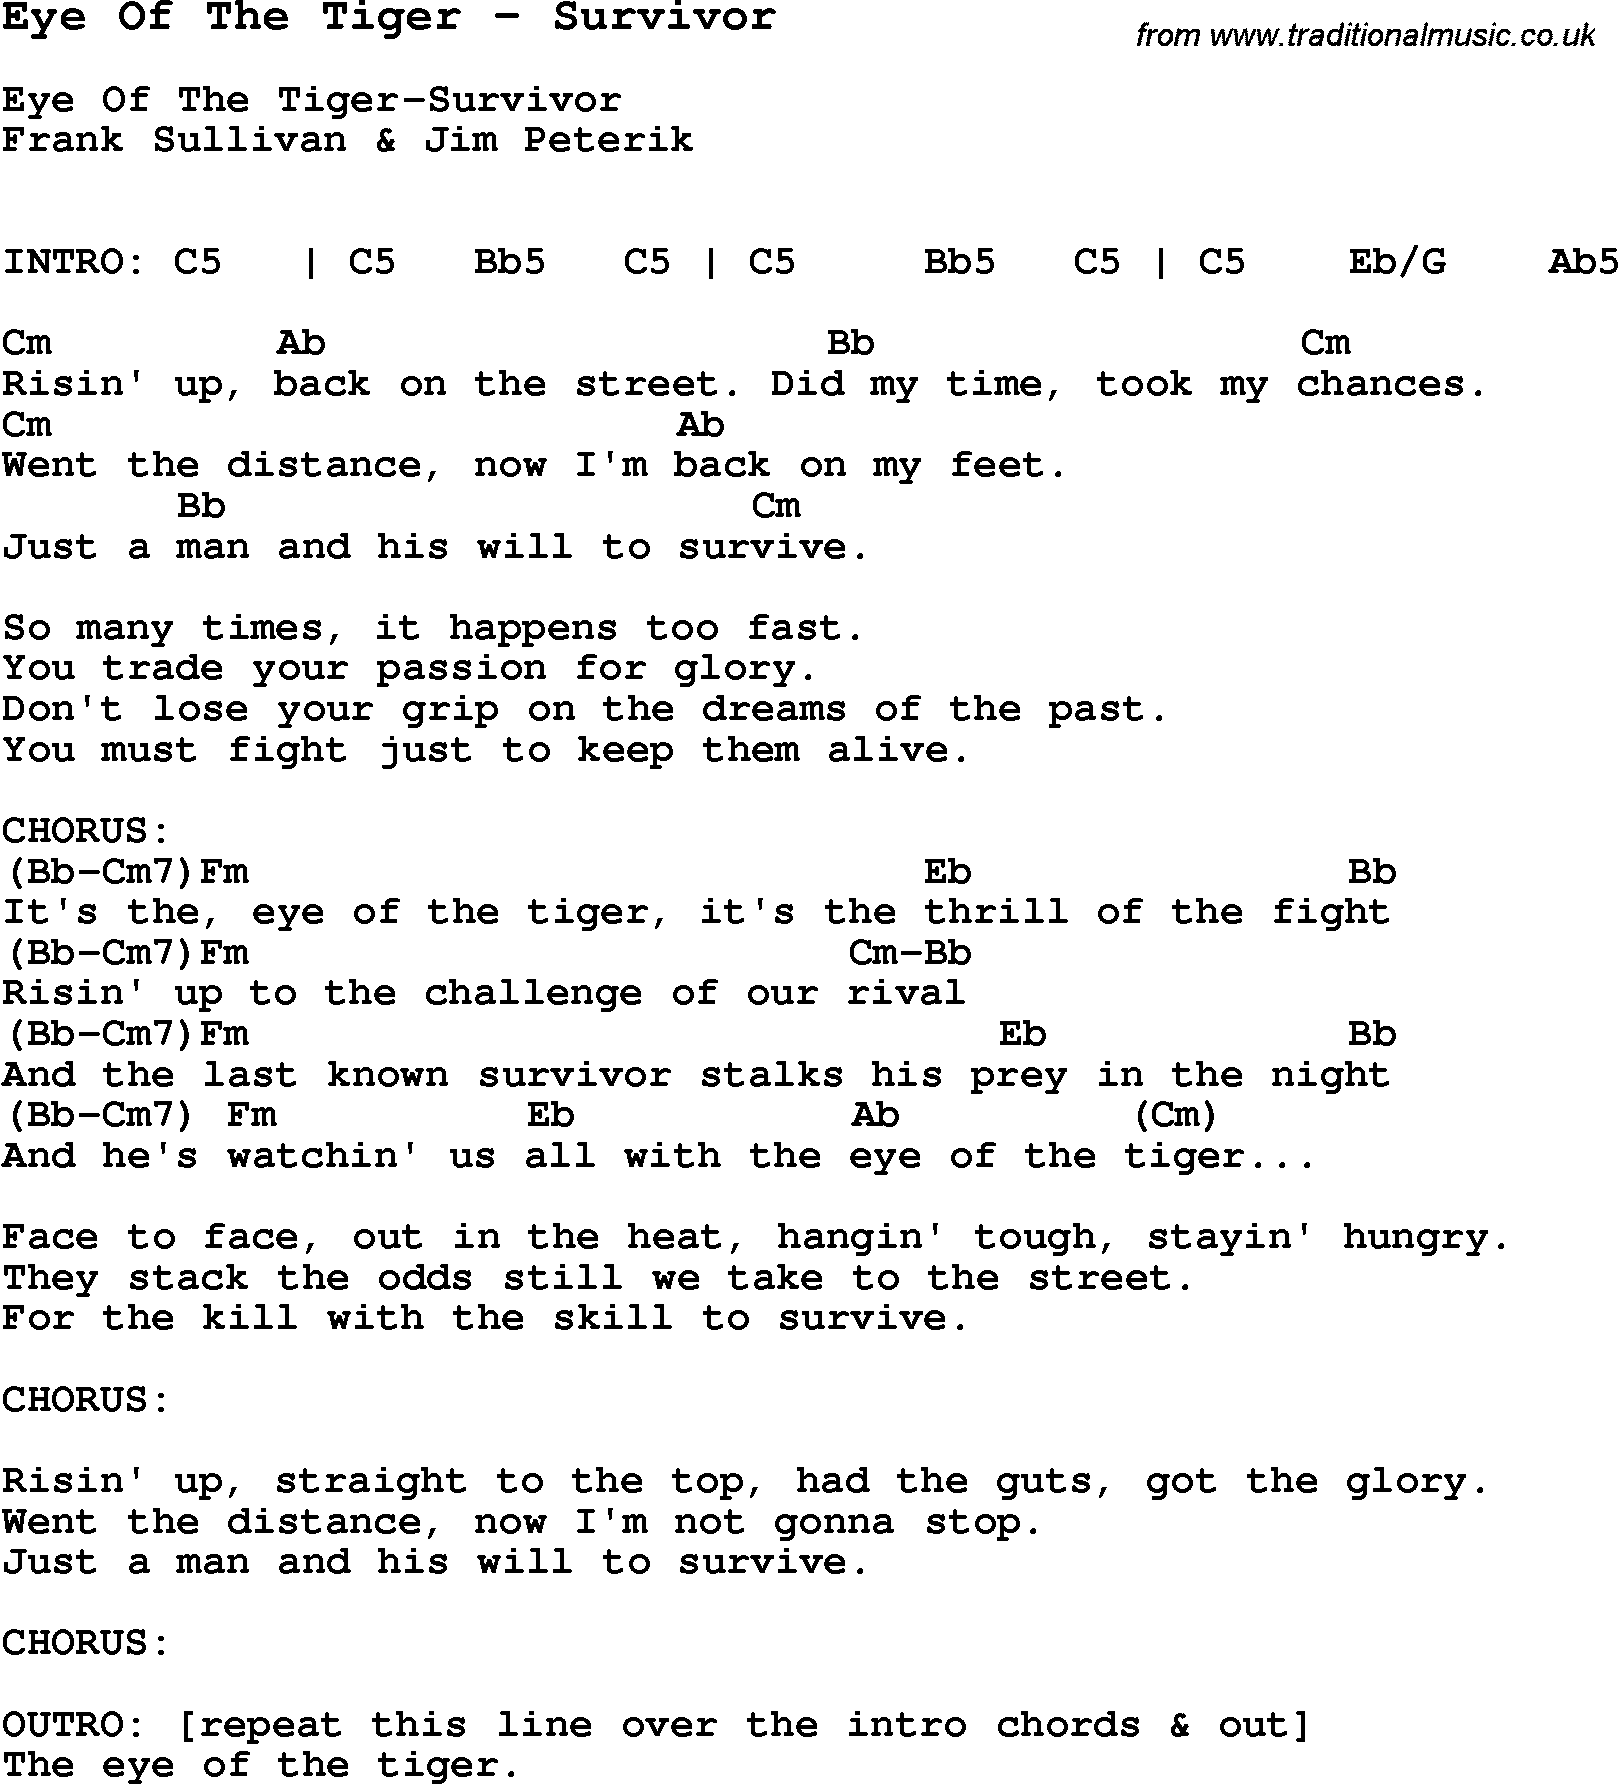 Song Eye Of The Tiger by Survivor, with lyrics for vocal performance and accompaniment chords for Ukulele, Guitar Banjo etc.